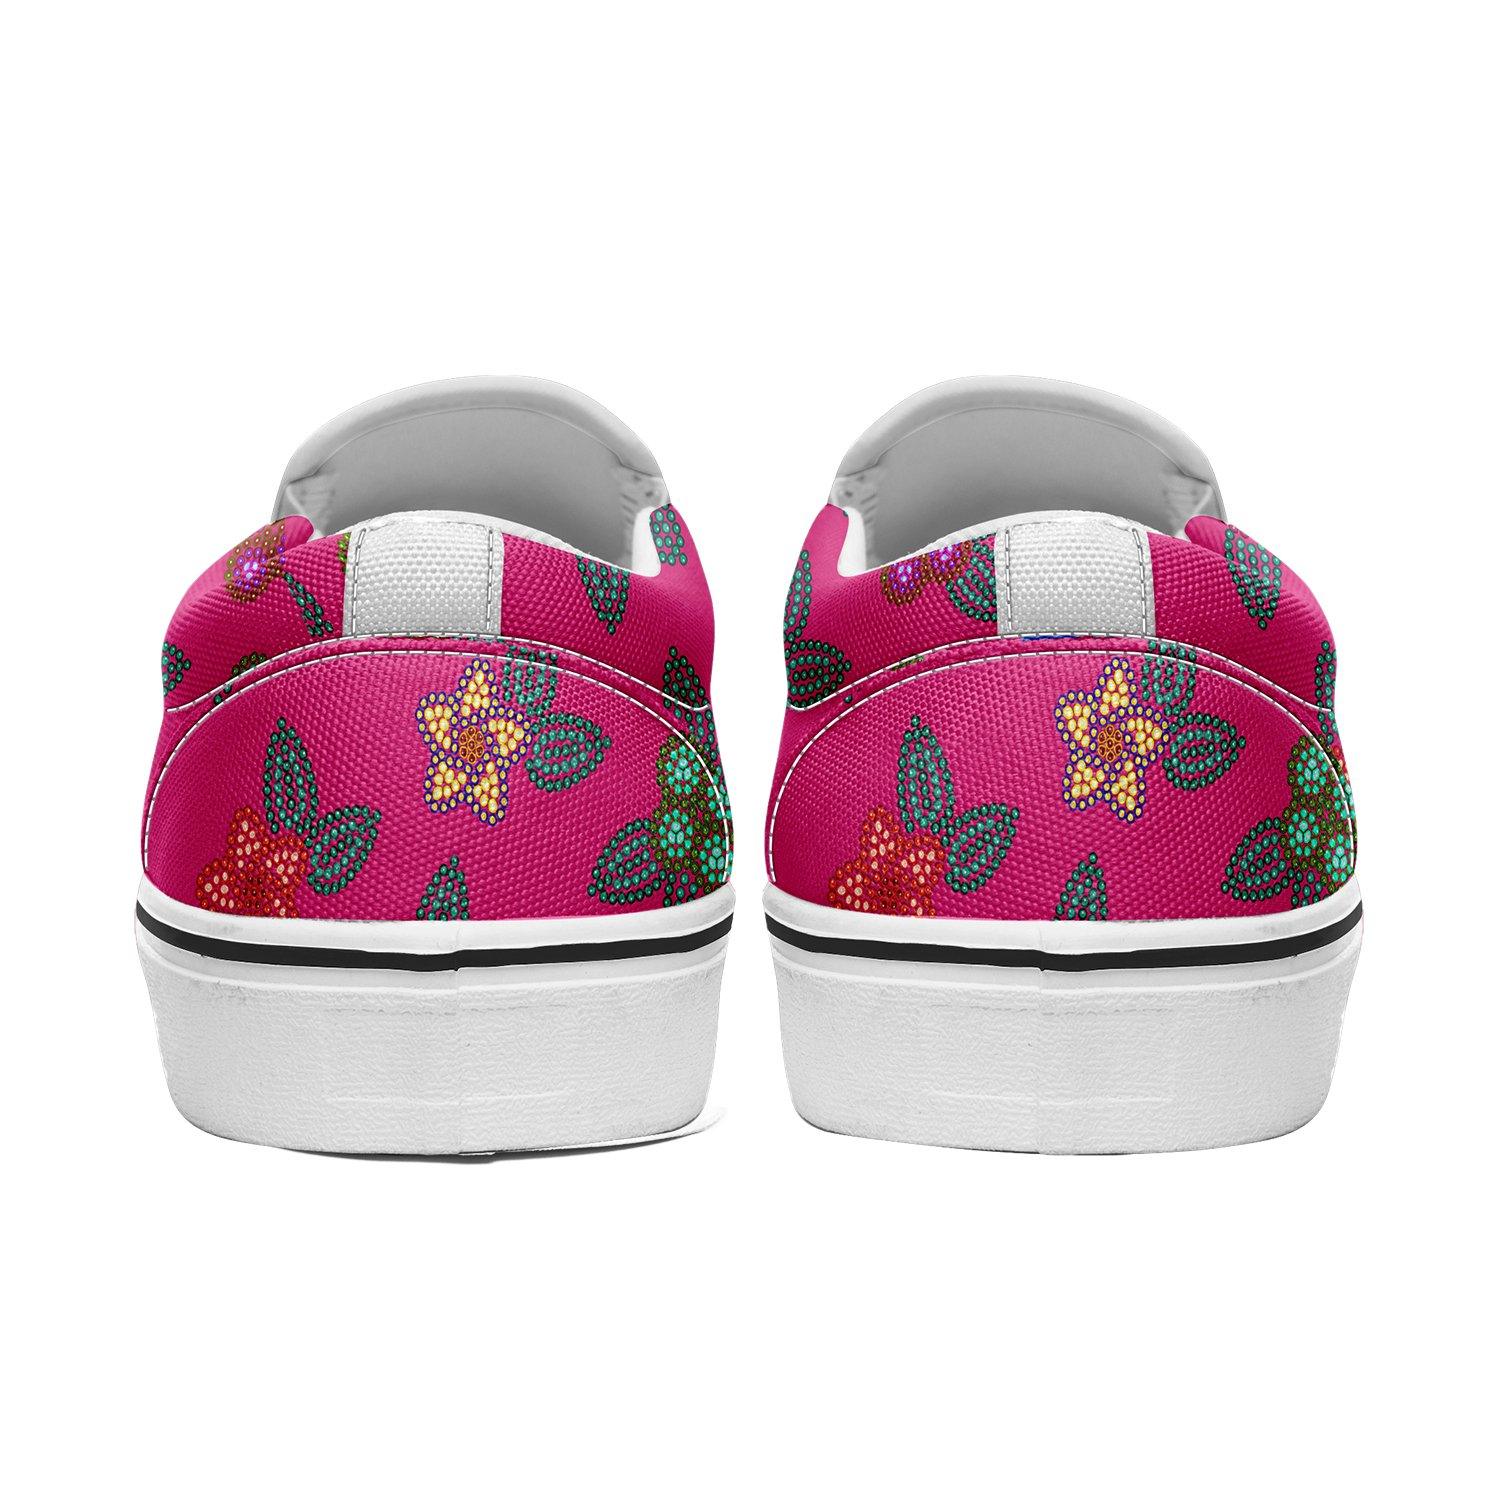 Berry Flowers Otoyimm Kid's Canvas Slip On Shoes otoyimm Herman 